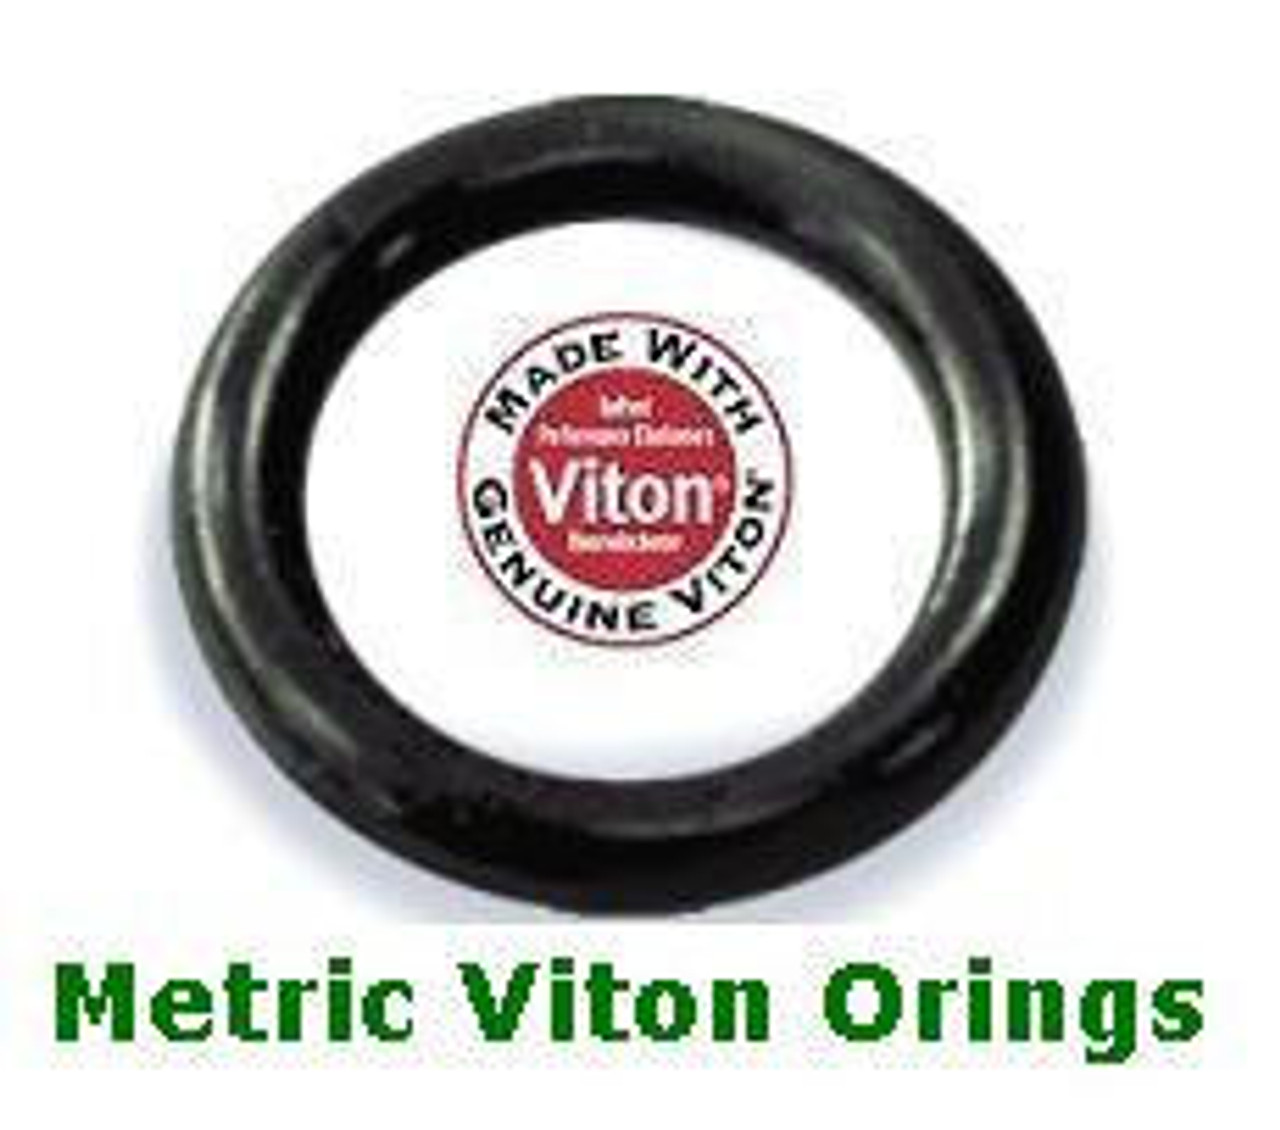 FKM O-ring 52 x 3mm Price for 1 pc